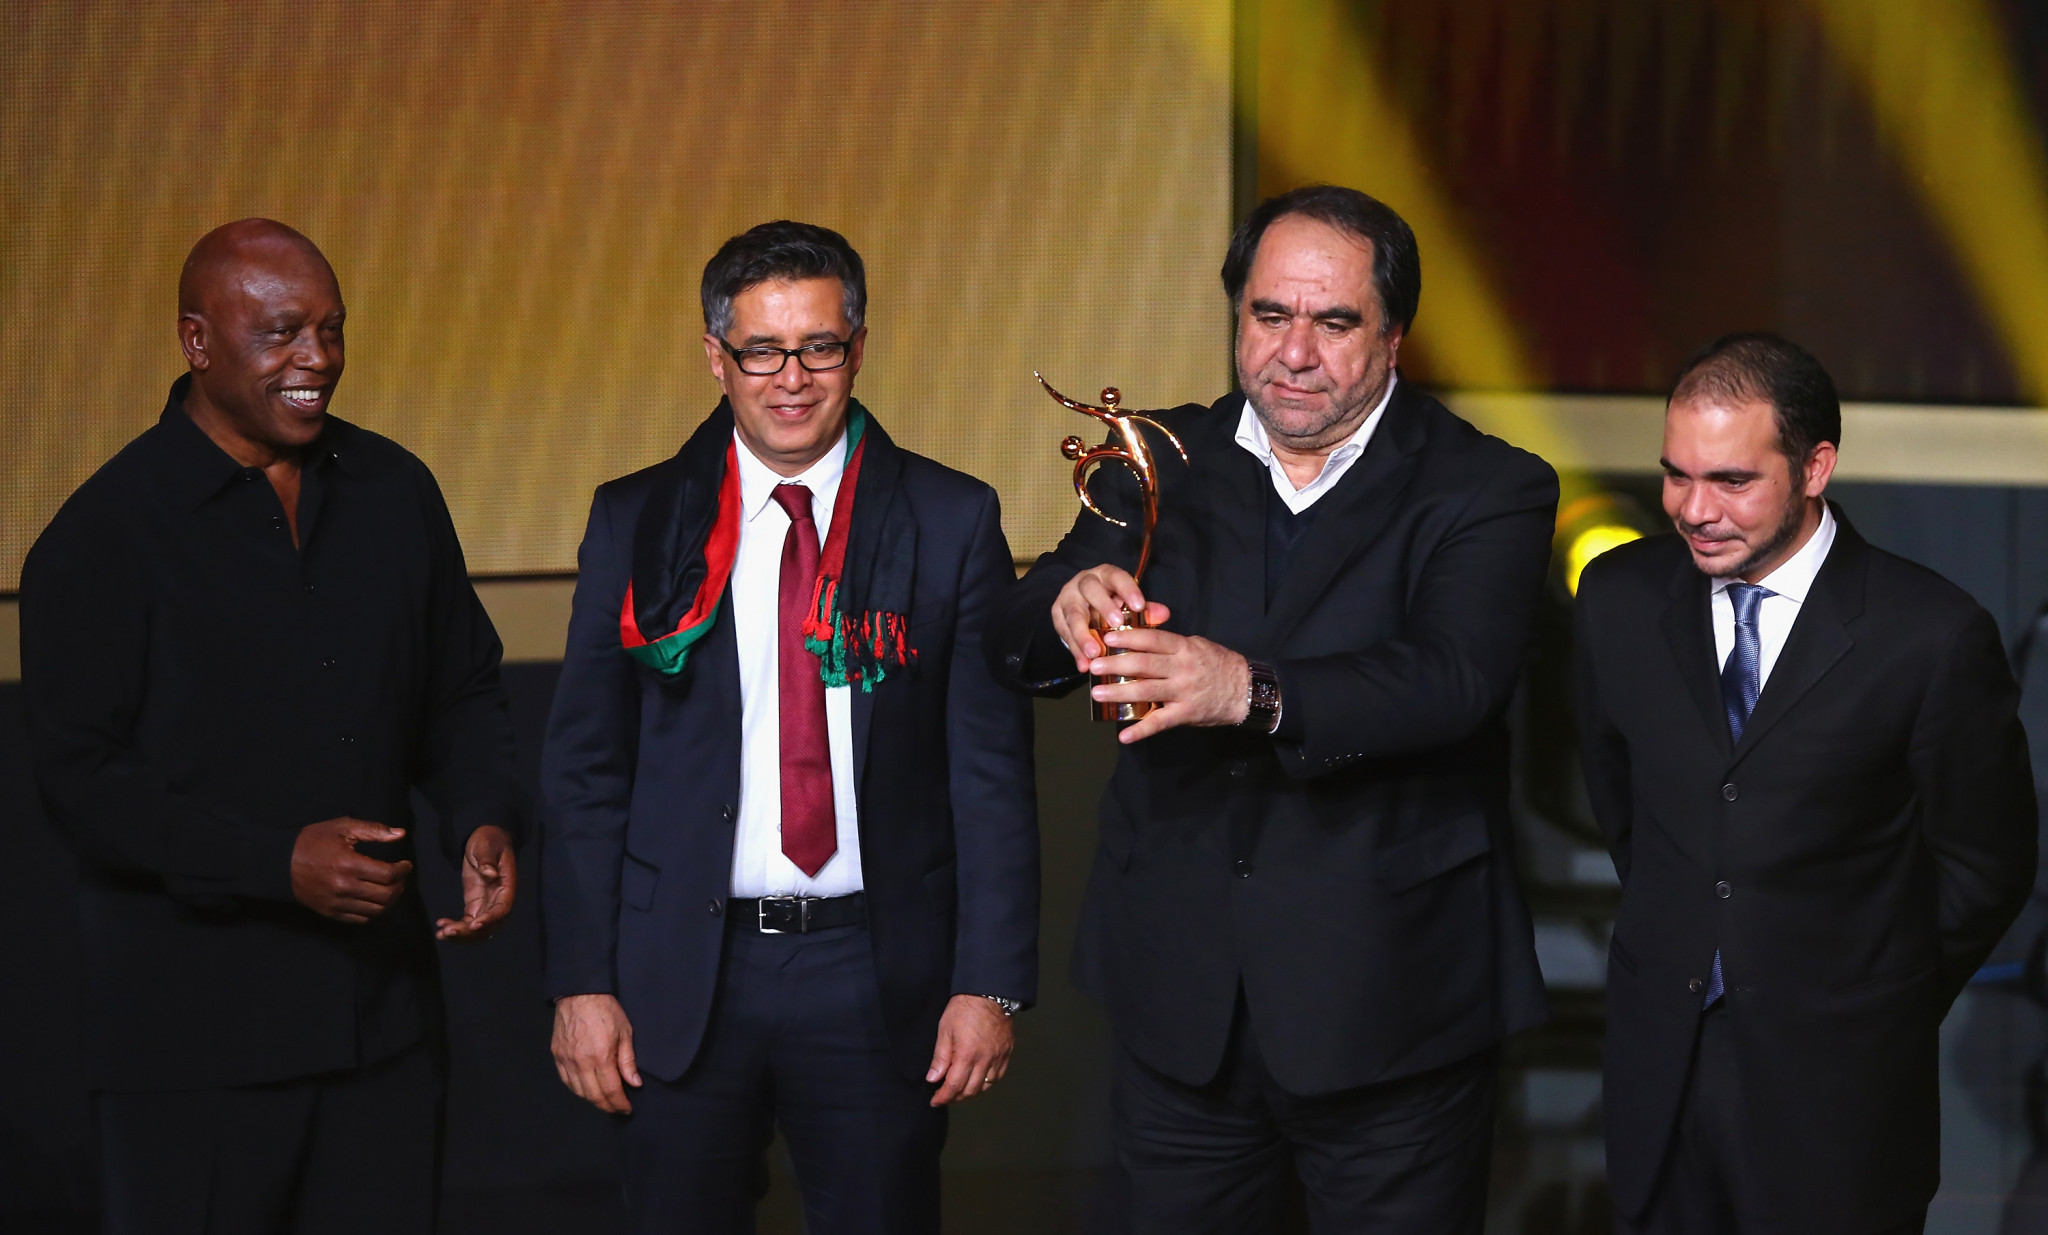 Keramuudin Karim, second right, has already been suspended from his position as Afghanistan Football Federation President after allegations of sexual abuse emerged ©Getty Images